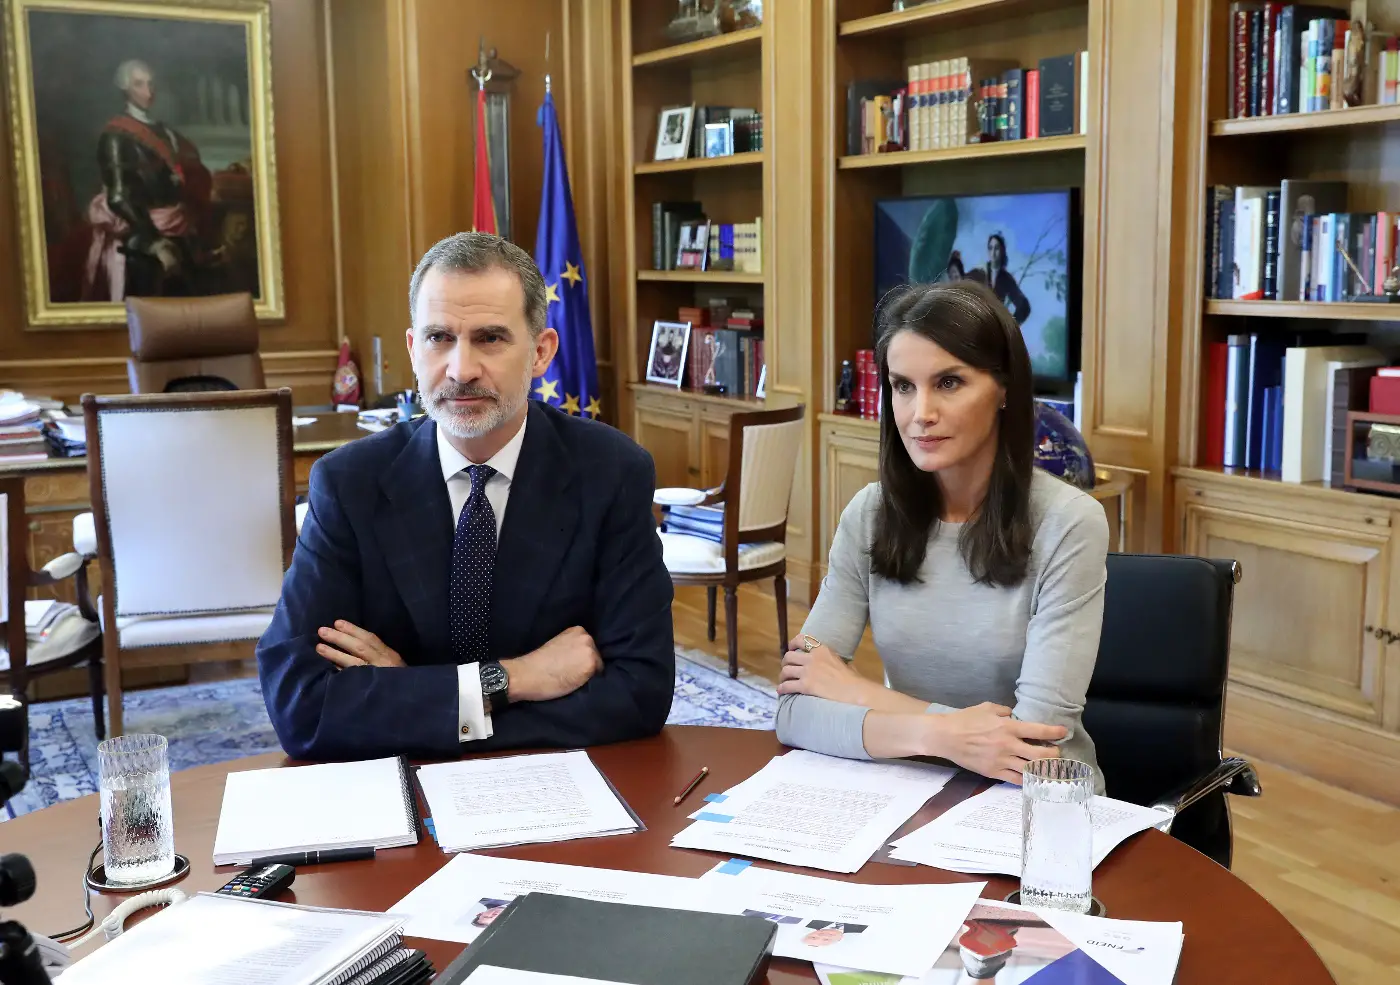 King Felipe and Queen Letizia of Spain were working on their 16th wedding anniversary